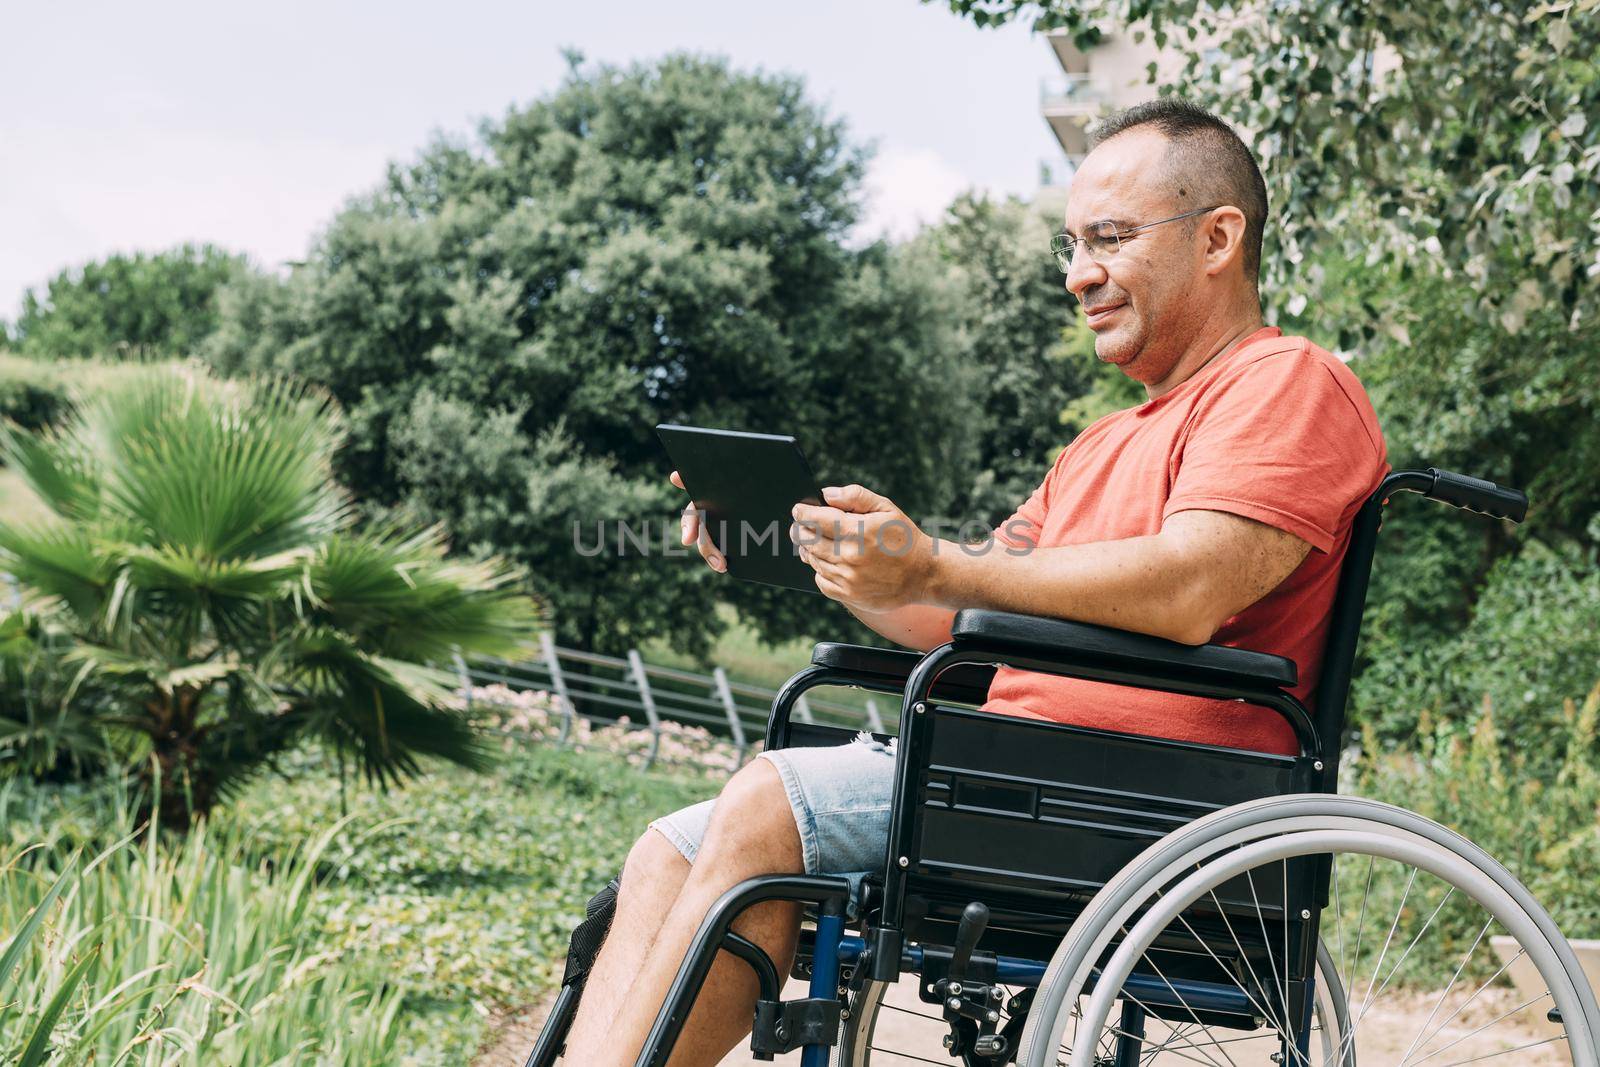 disabled man in wheelchair having fun while working at park using a tablet computer, concept of technological and occupational integration of people with disabilities and reduced mobility problems